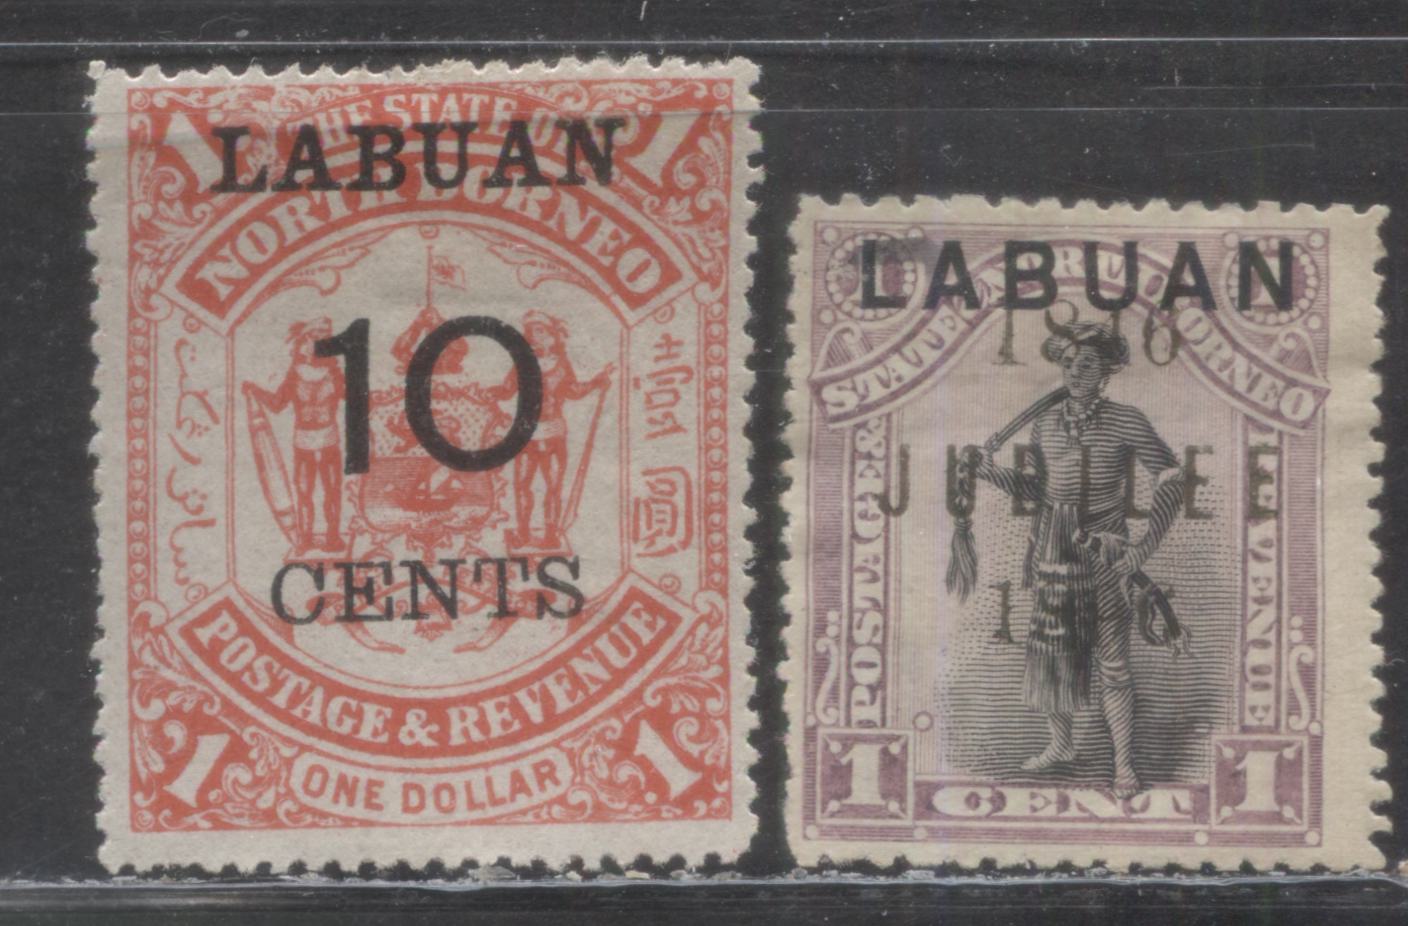 Lot 433 Labuan SC#54/66d 1895 Definitives, Perf 13.5 x 14 (1c), 2 VG/FOG Single, Click on Listing to See ALL Pictures, Estimated Value $20 USD